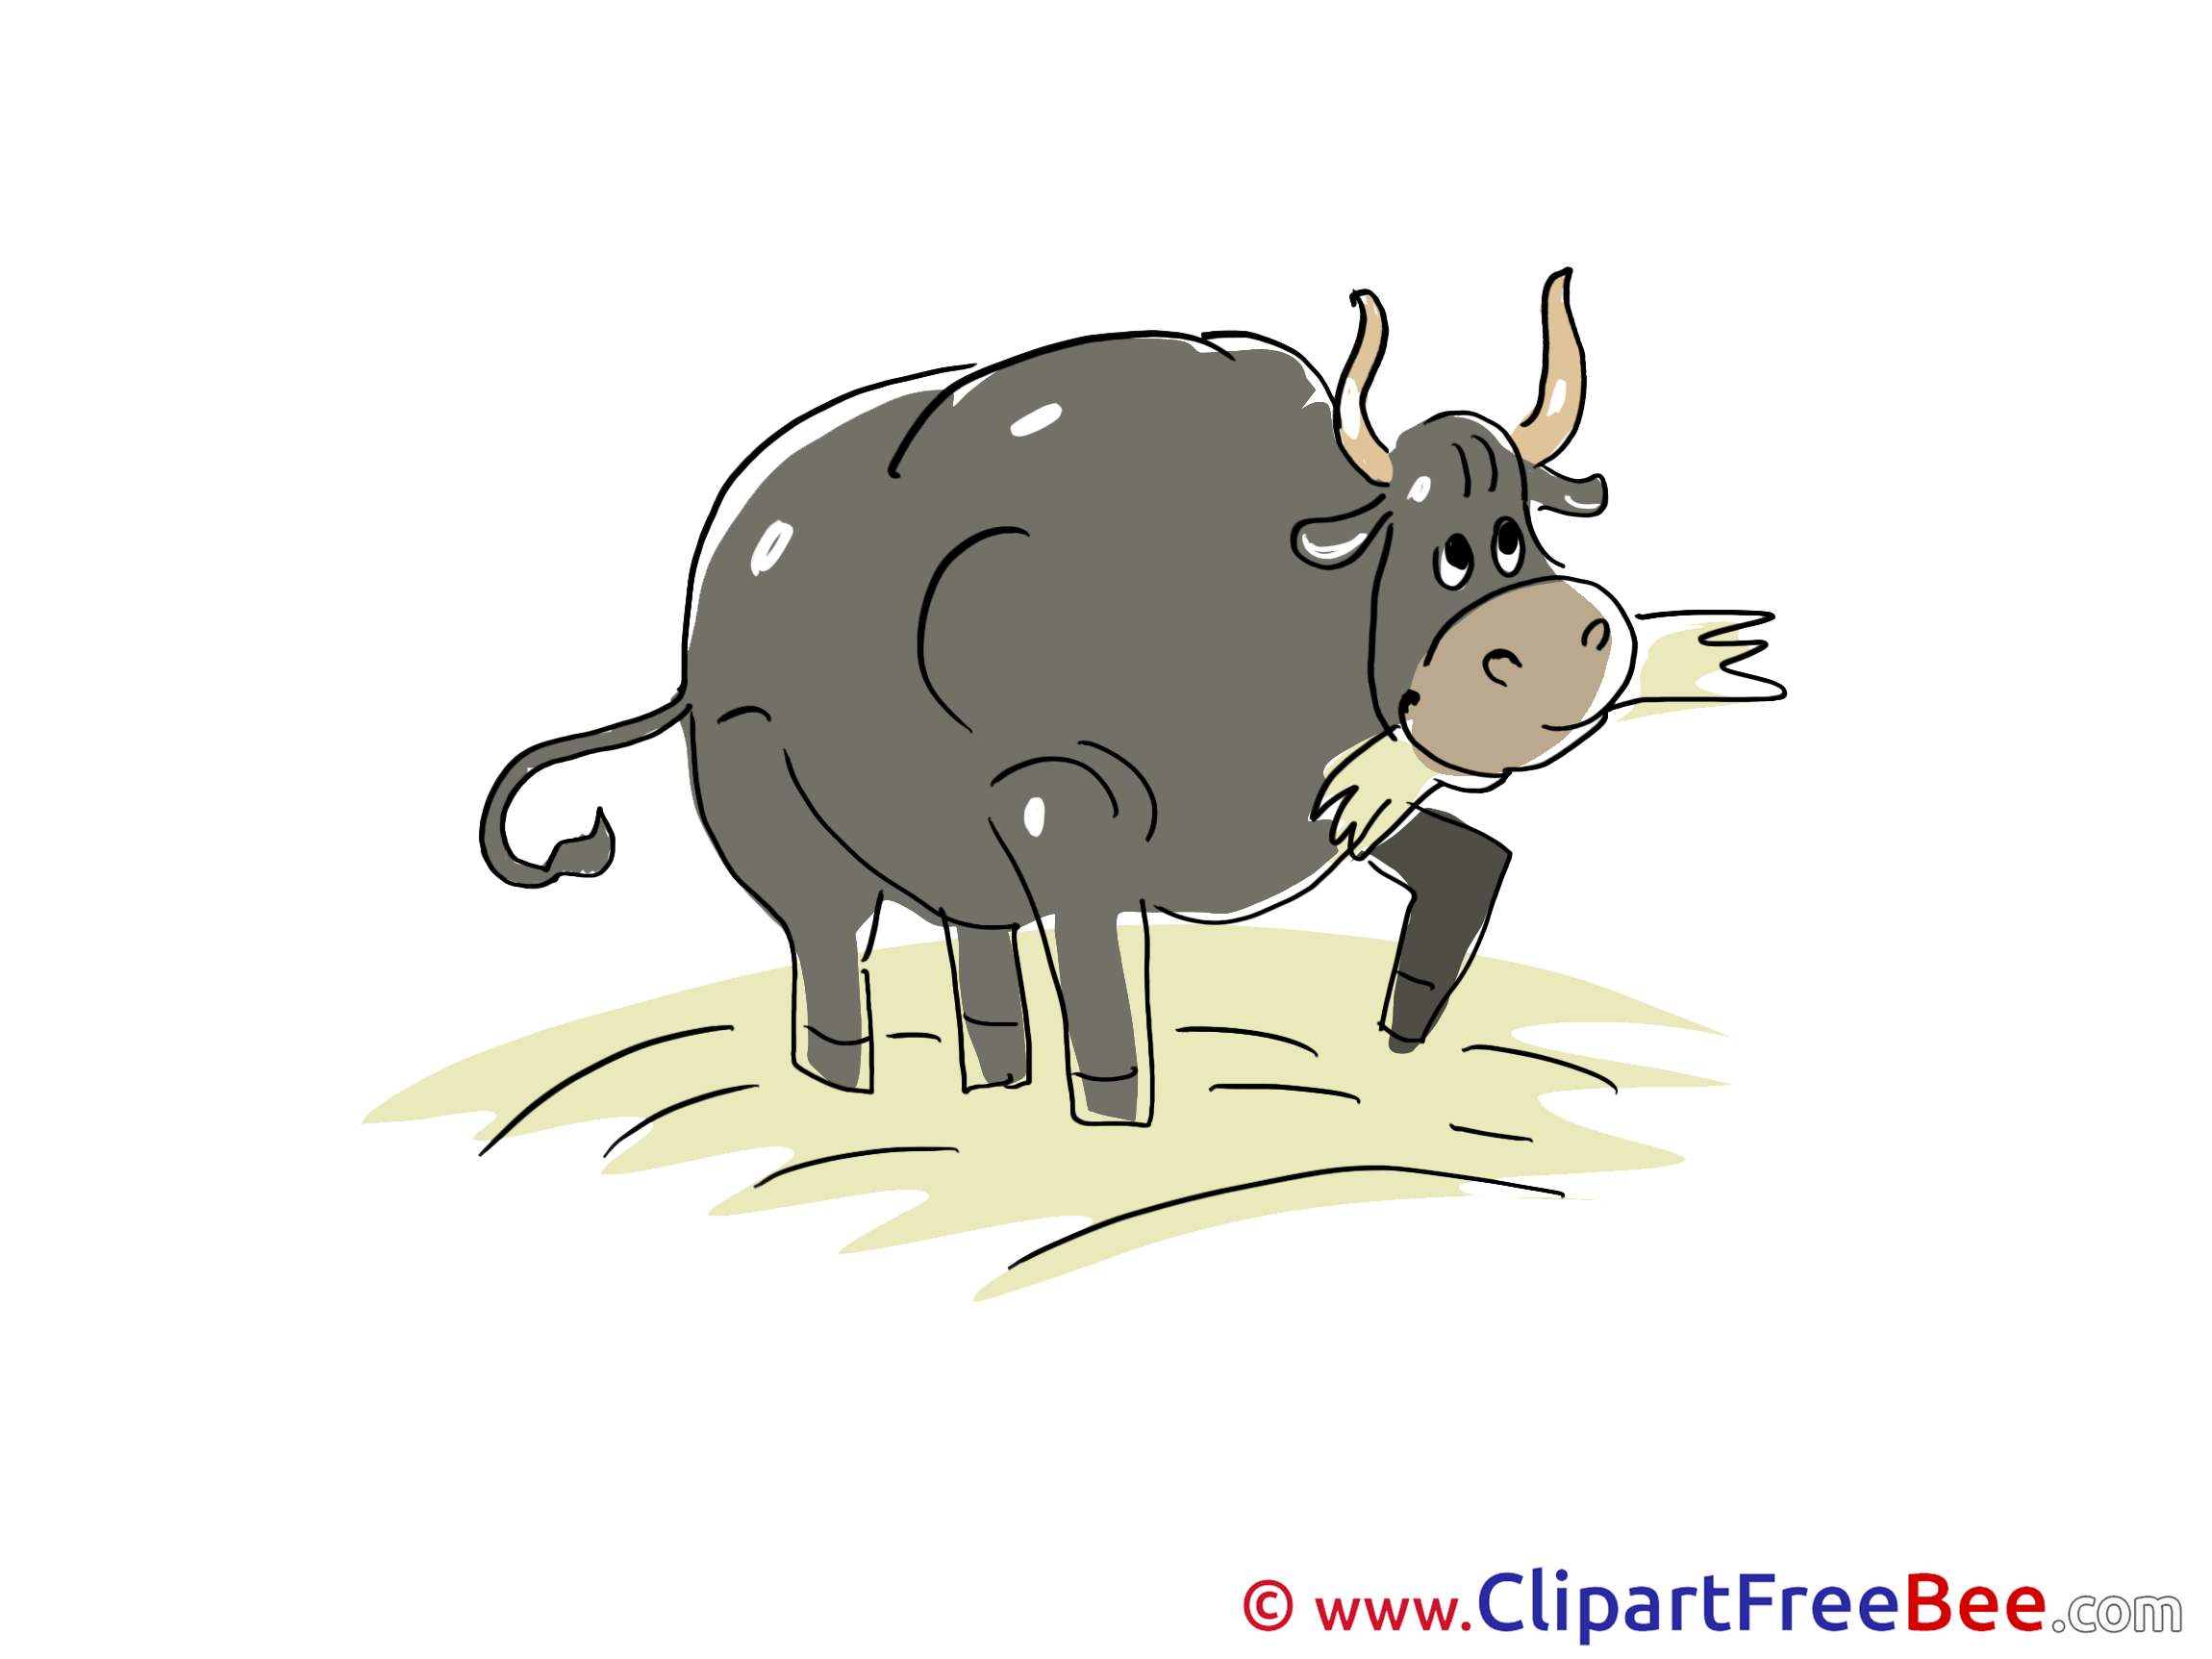 Hay Bull download Clip Art for free